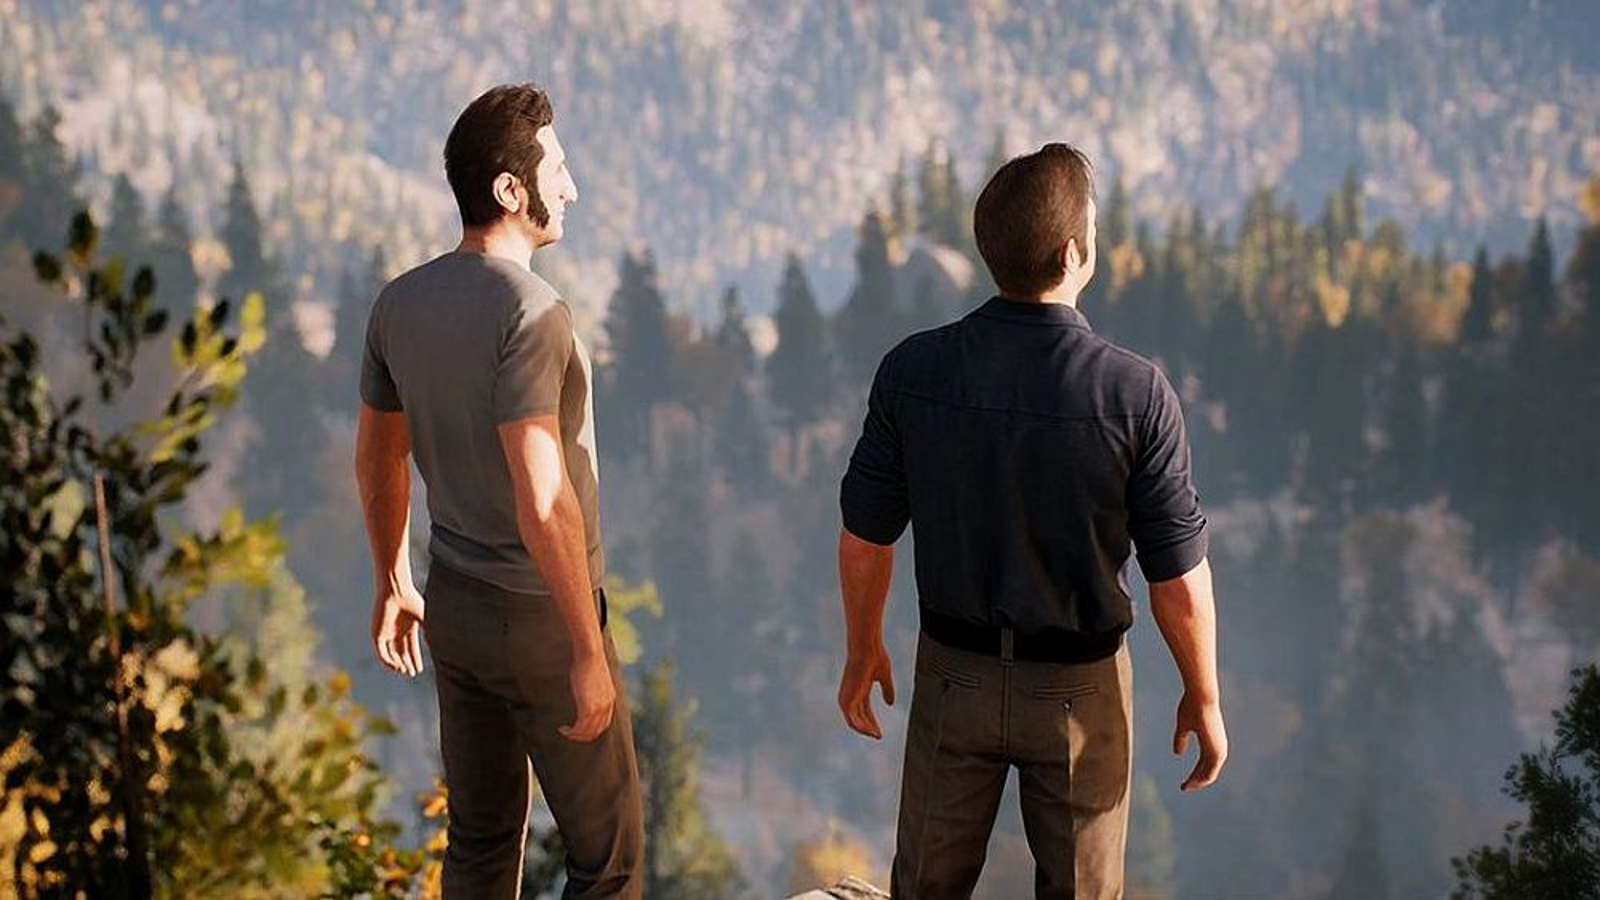 A want to get a way. A way out Винсент. Way out игра. А Wаy оut игра. A way out (2018).